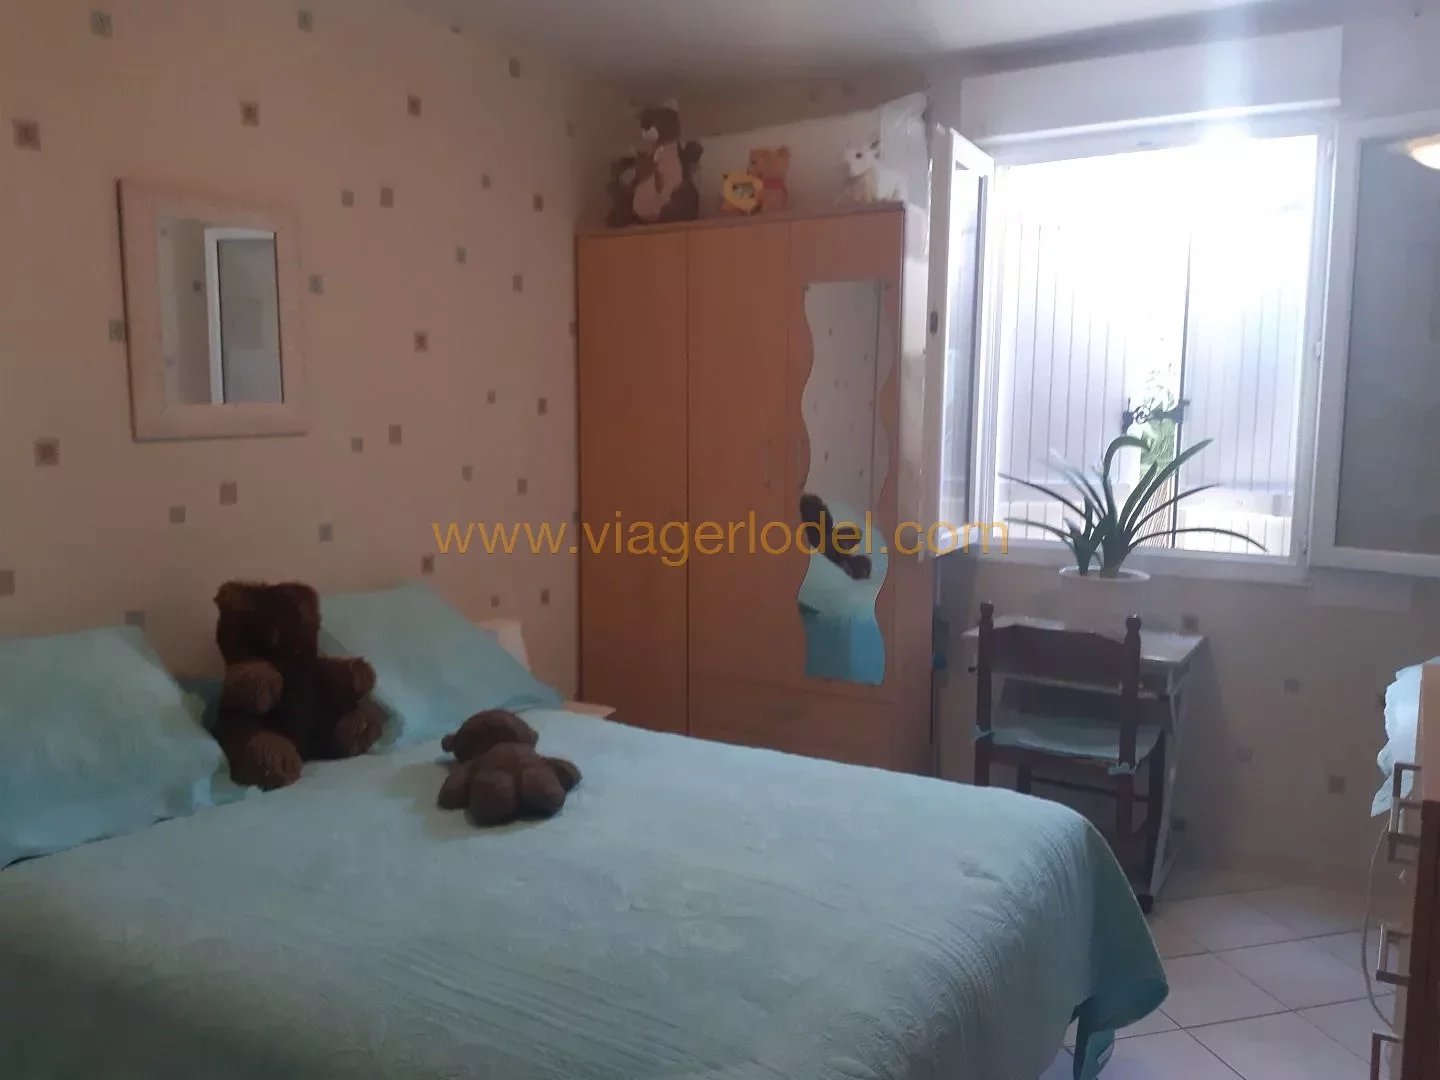 Ref. 9159 OCCUPIED VIAGER (LIFE ANNUITY), REGUSSE (83)